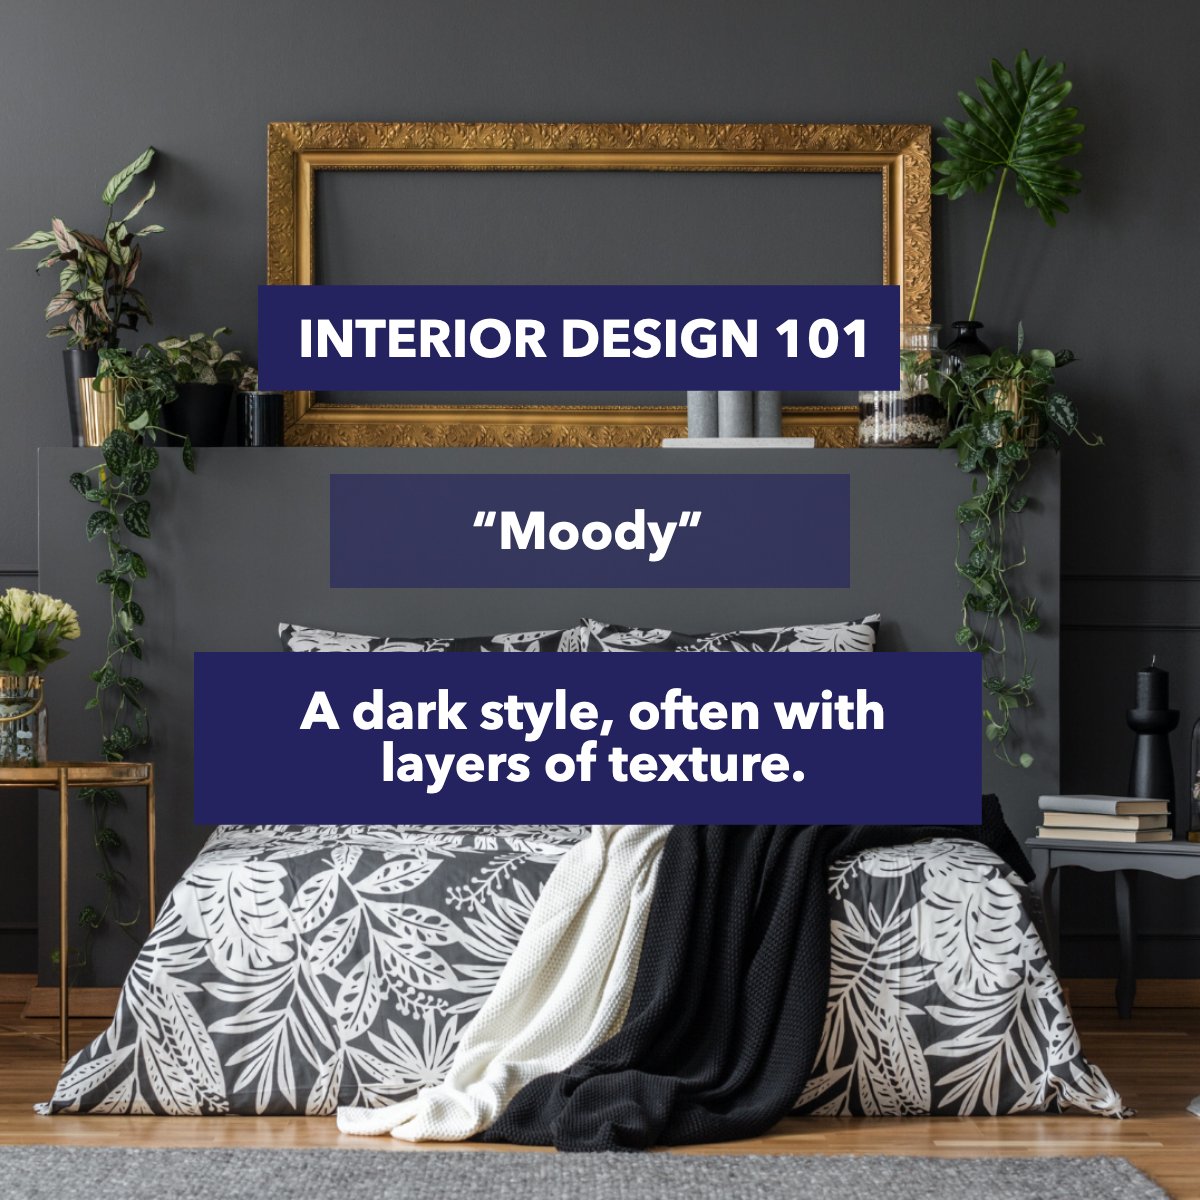 Moody is not only a mood is a style in interior design. Are you feeling moody? #interiorsdesign #interiortrends #interiordesigning #interiordesigntrends #interiorsaddict #interiordesigntips #interiordesigngoals #dreamhome #homeowner #goals #homegoals